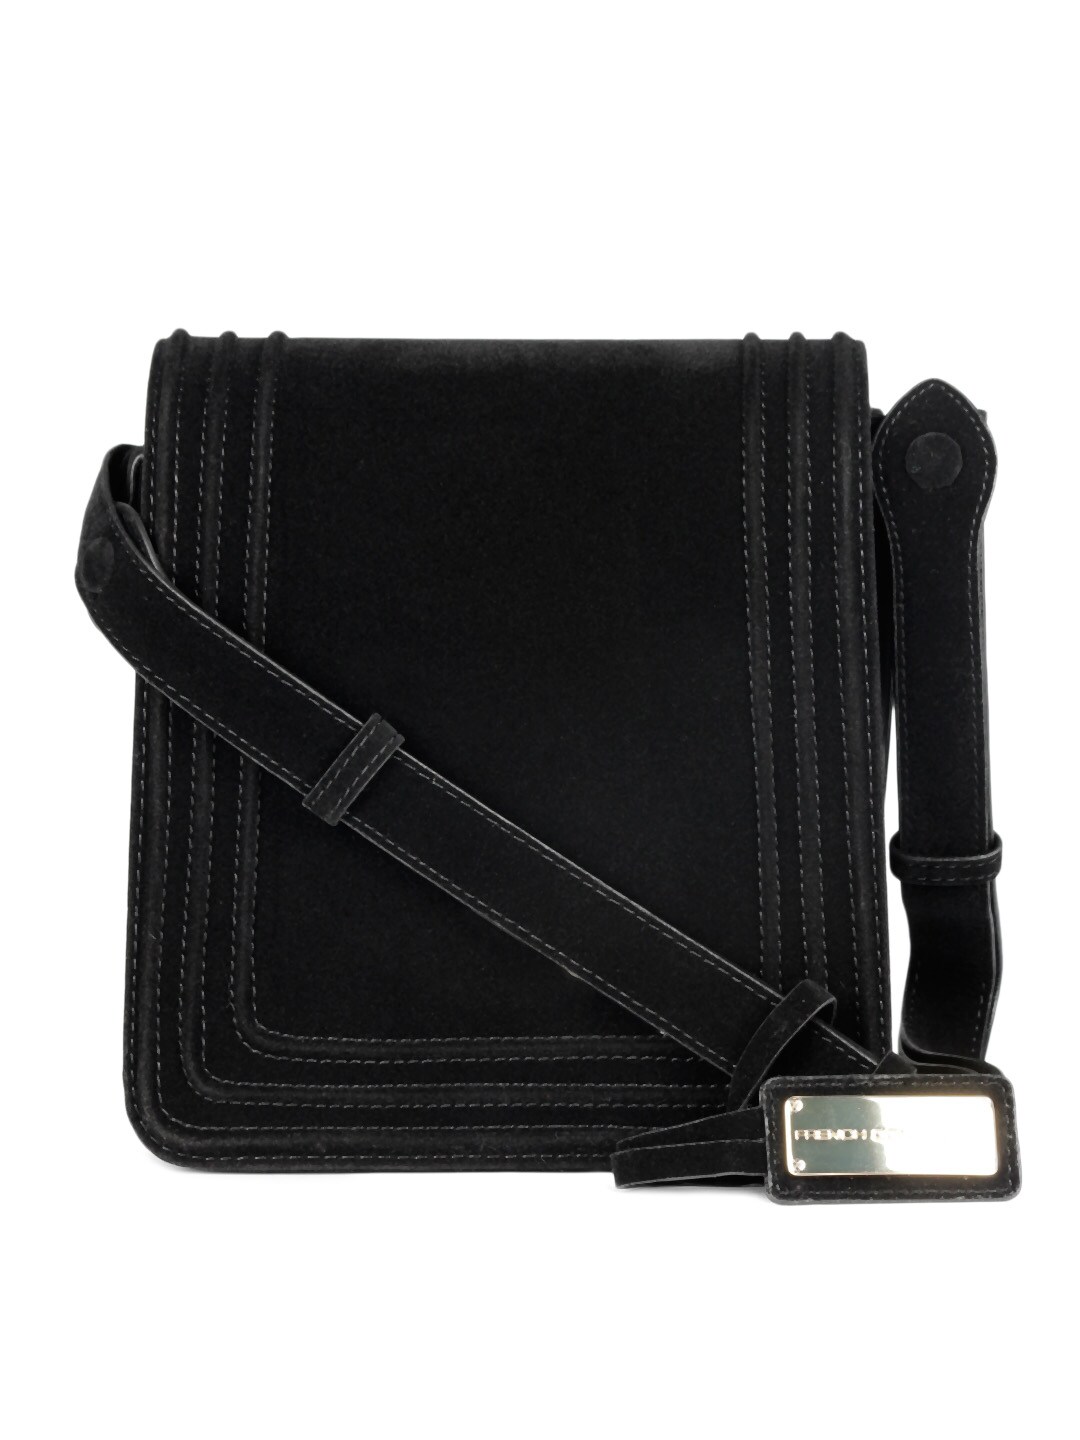 French Connection Women Black Sling Bag